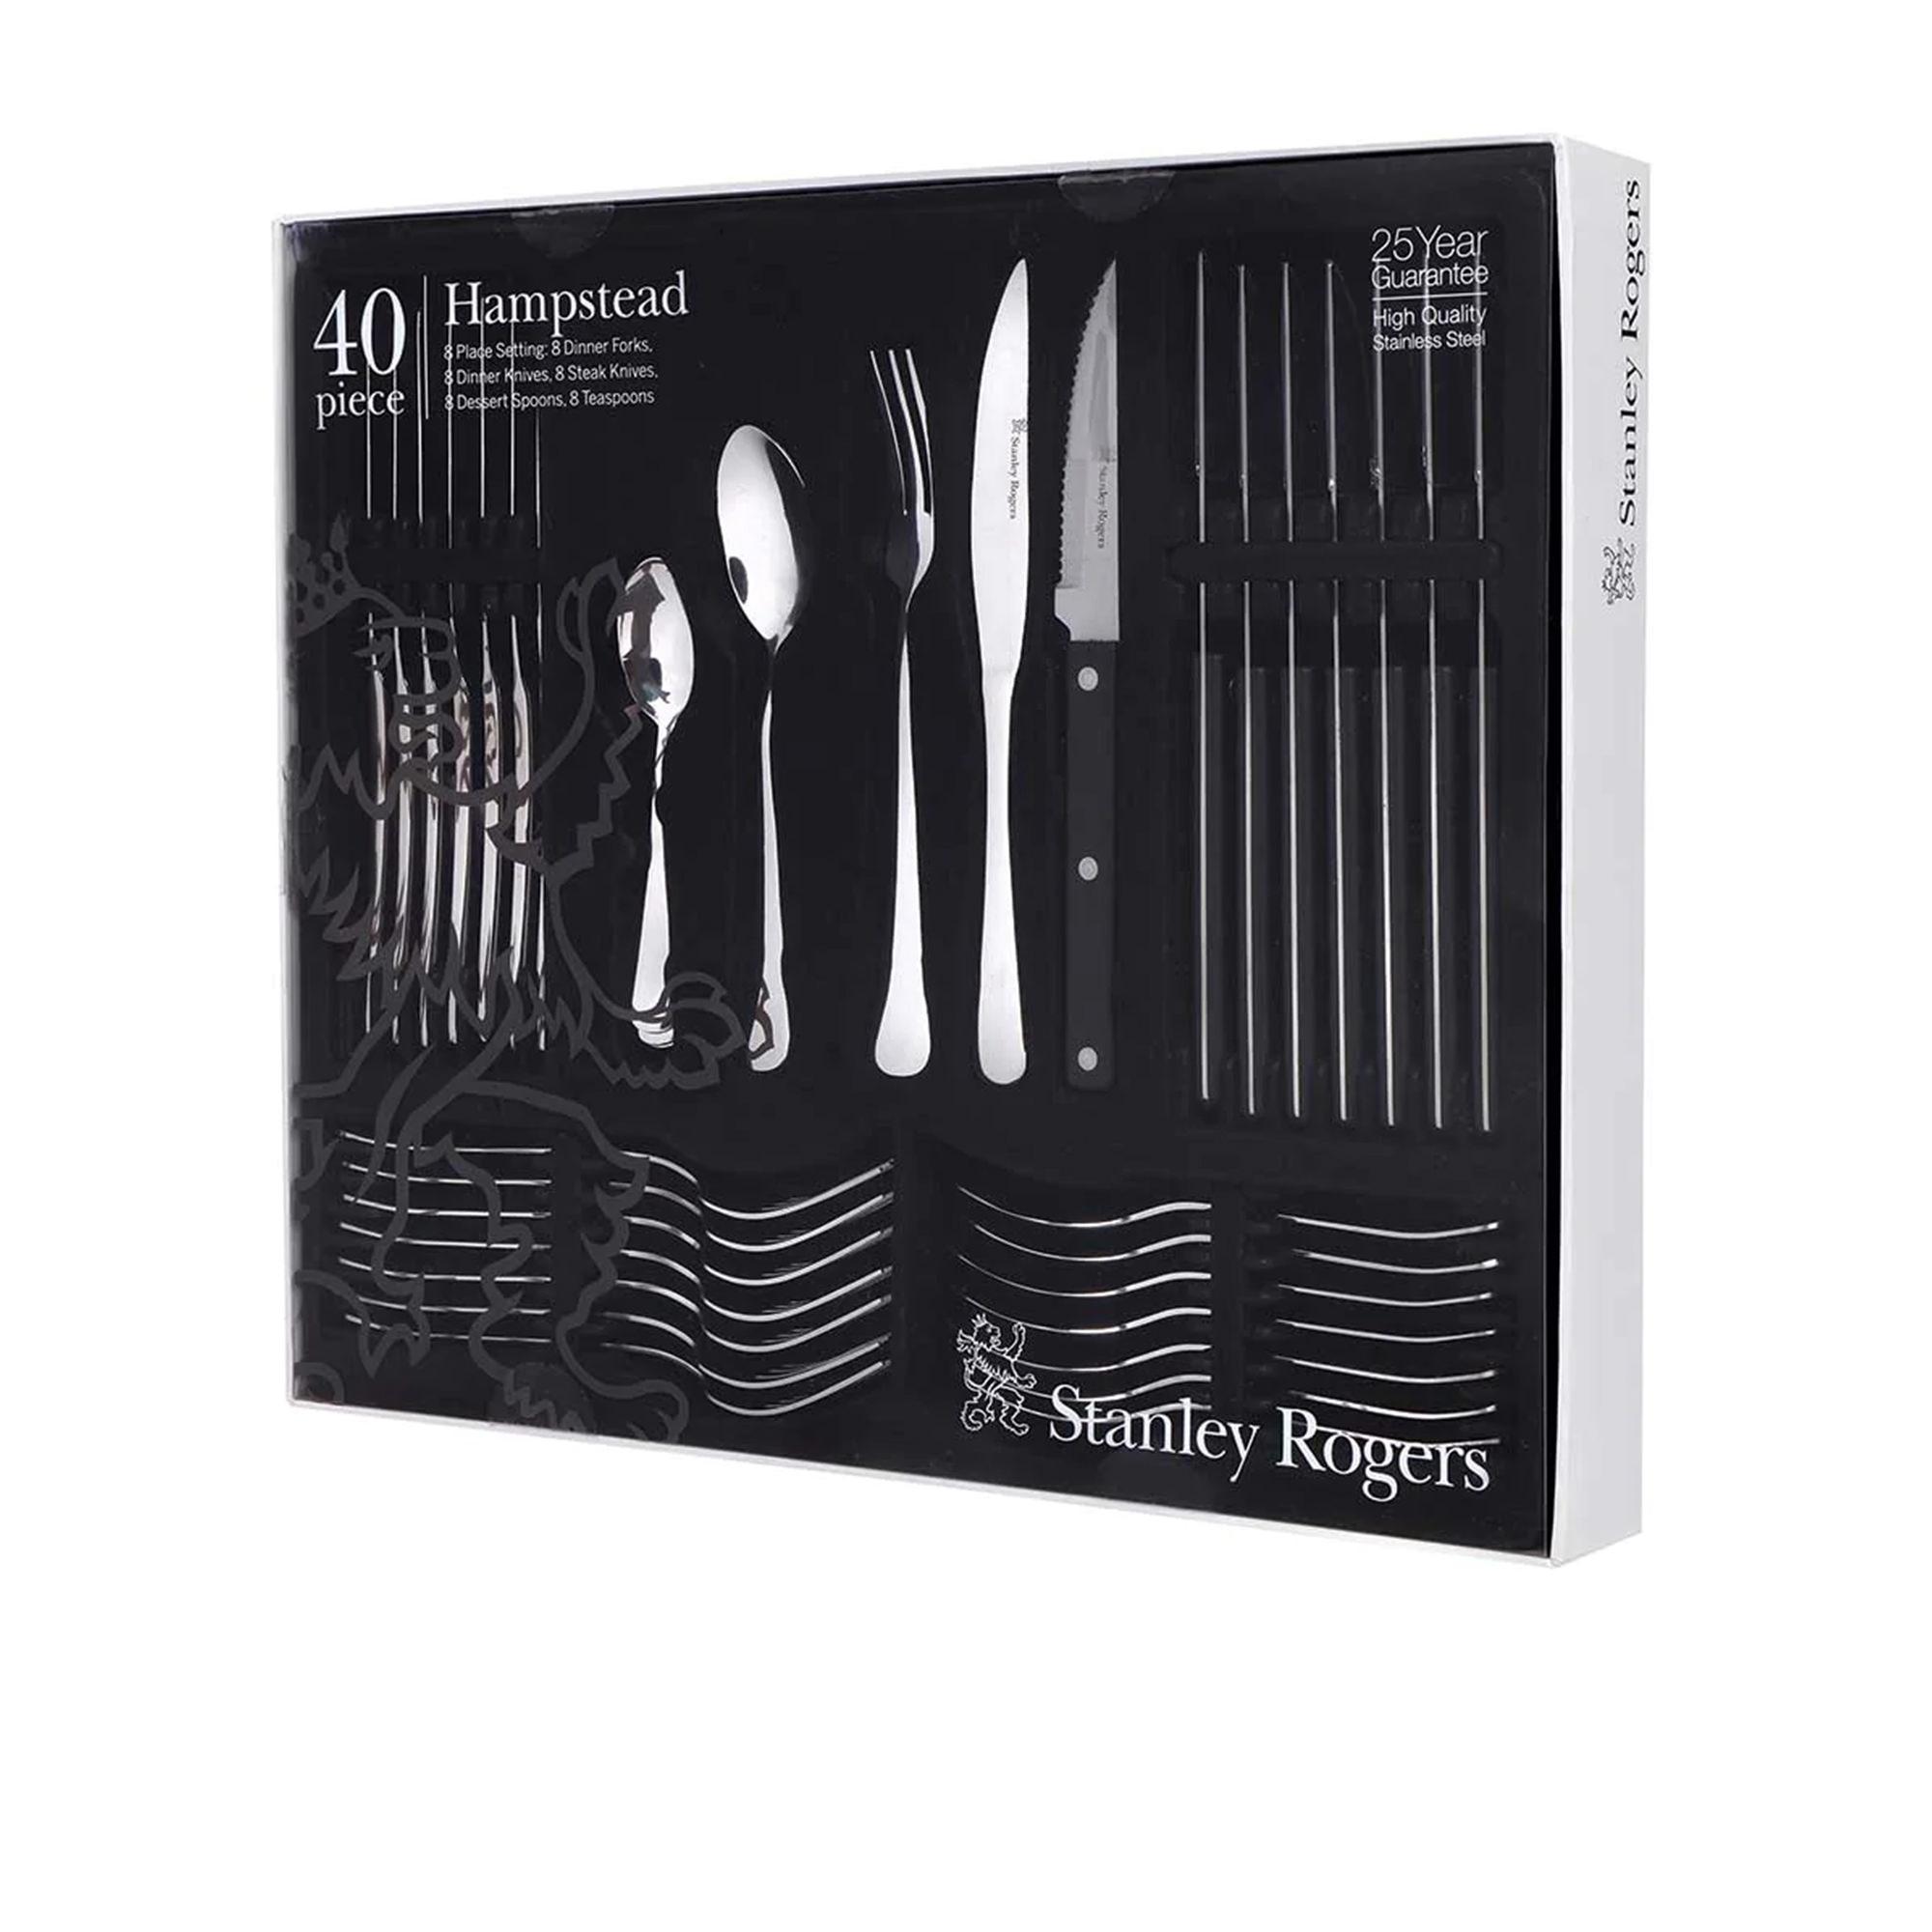 Stanley Rogers Hampstead Cutlery Set 40pc Image 5